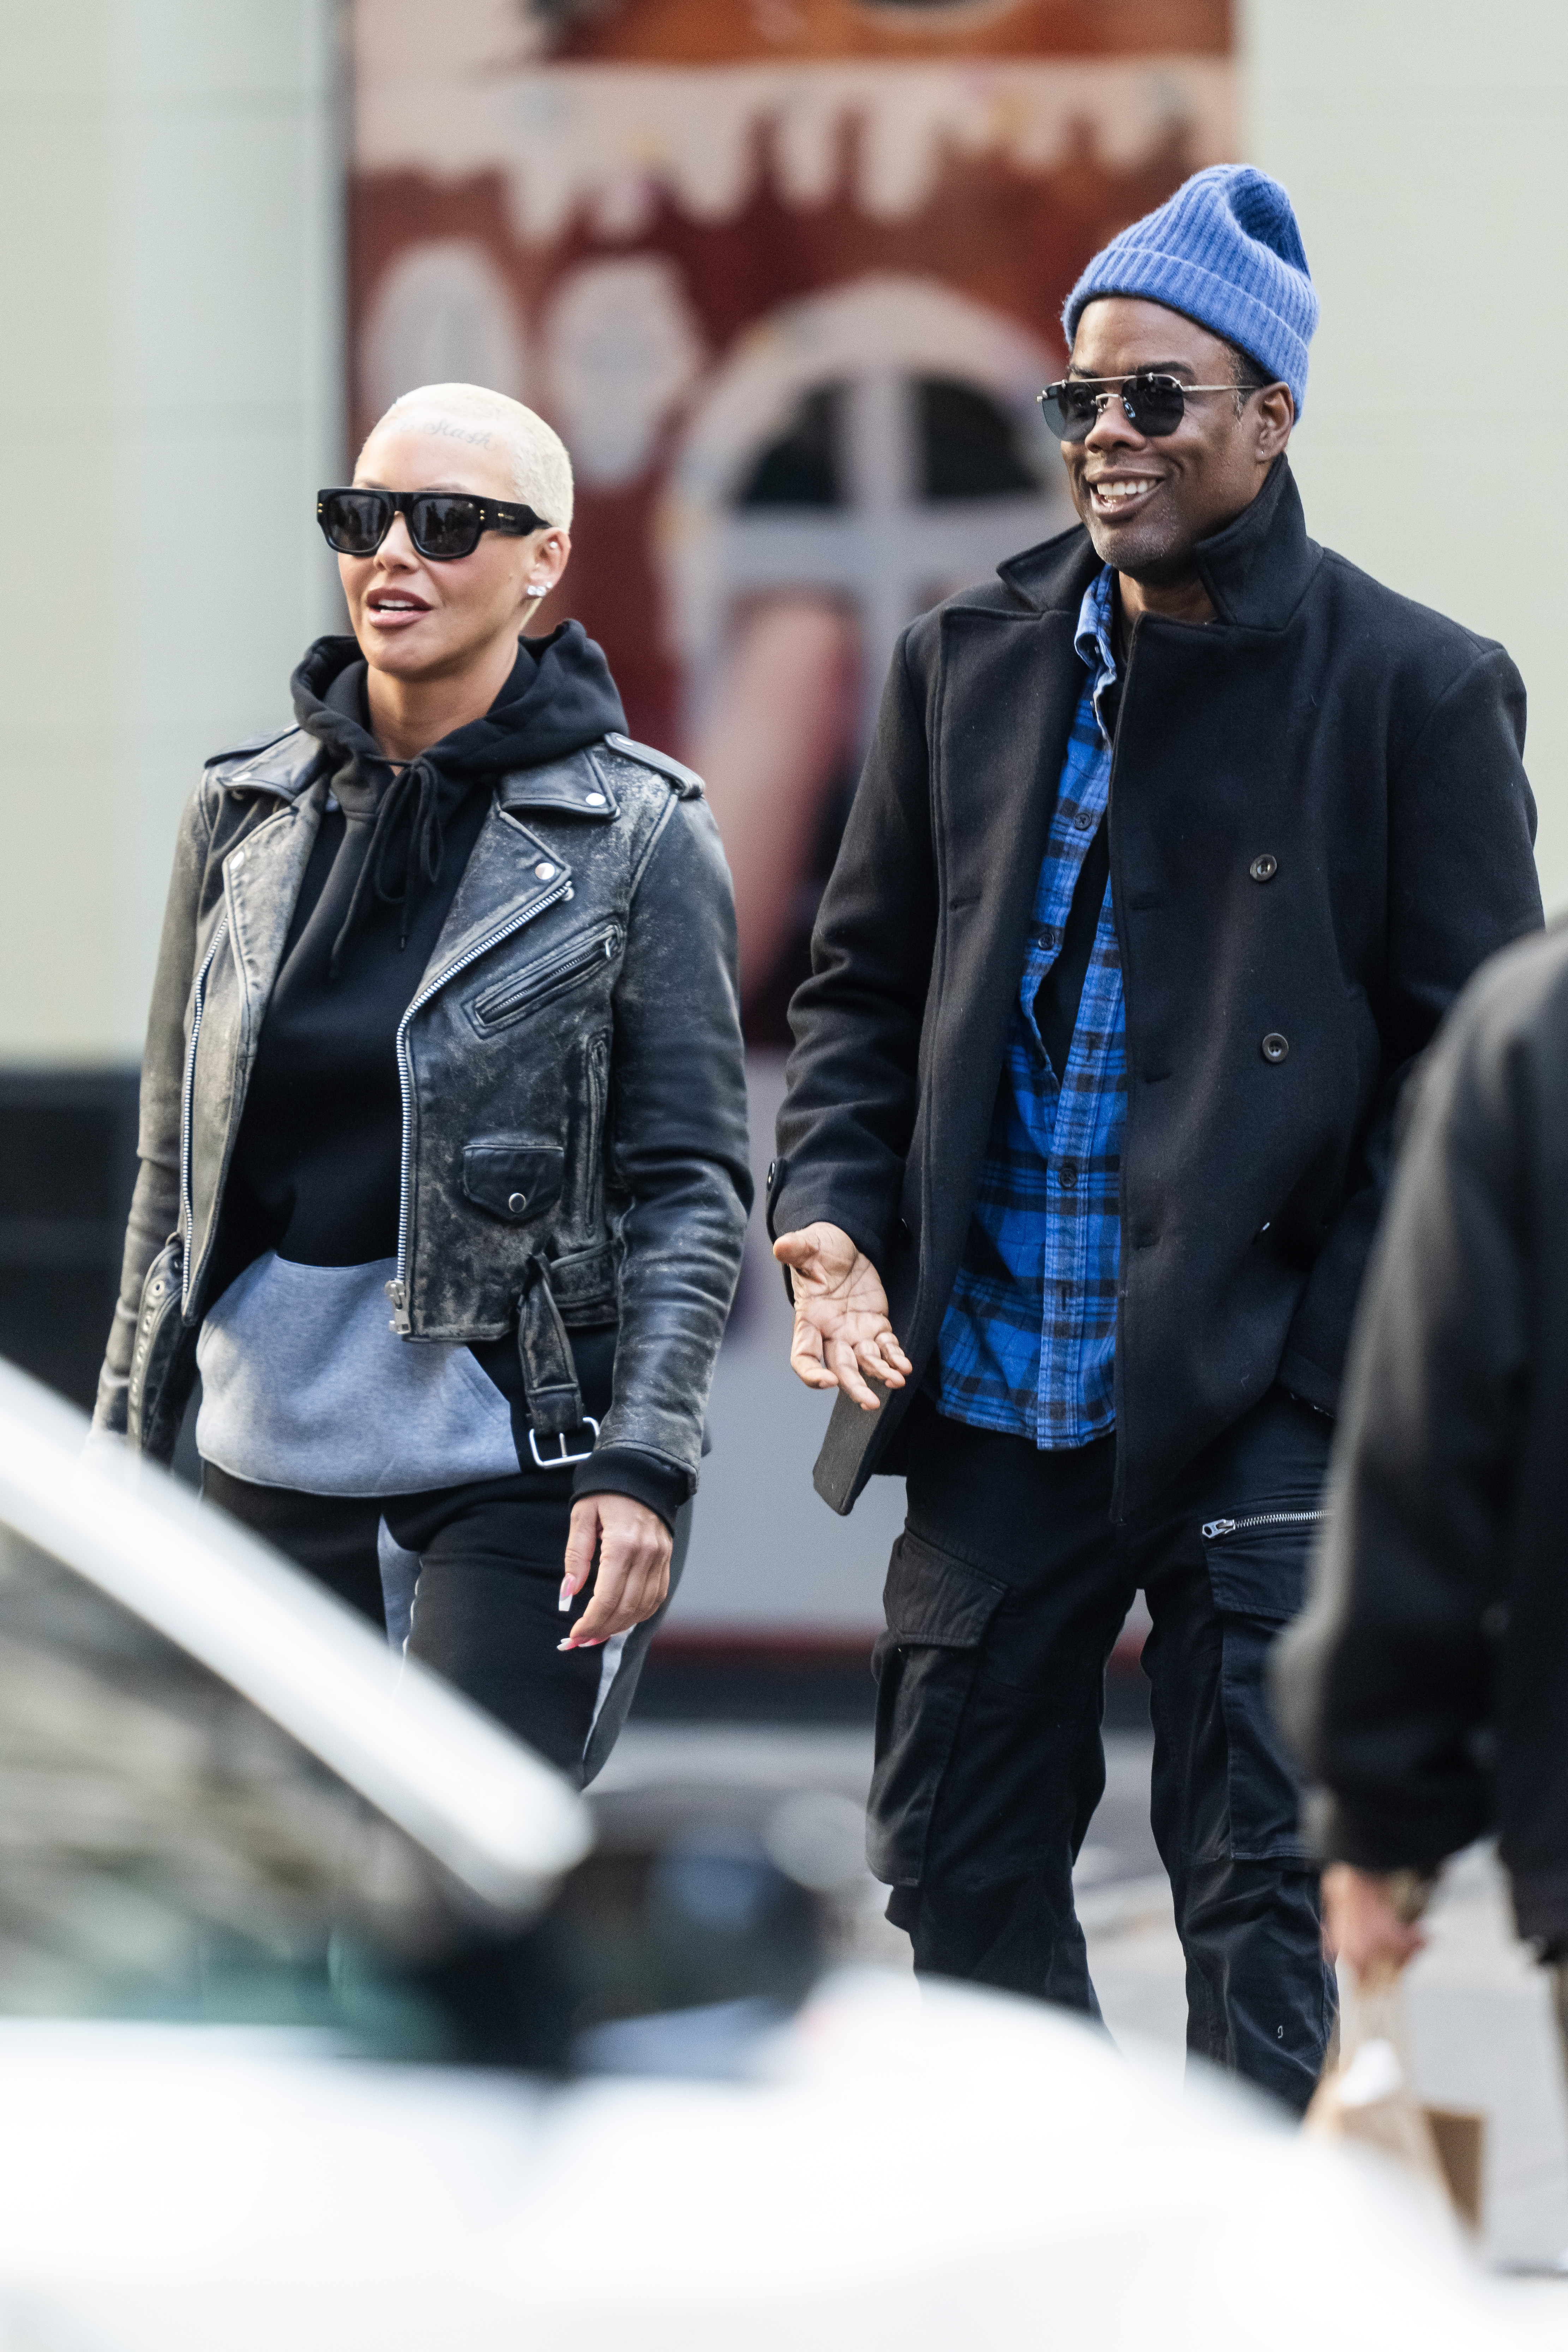 Chris Rock and Amber Rose in NYC.